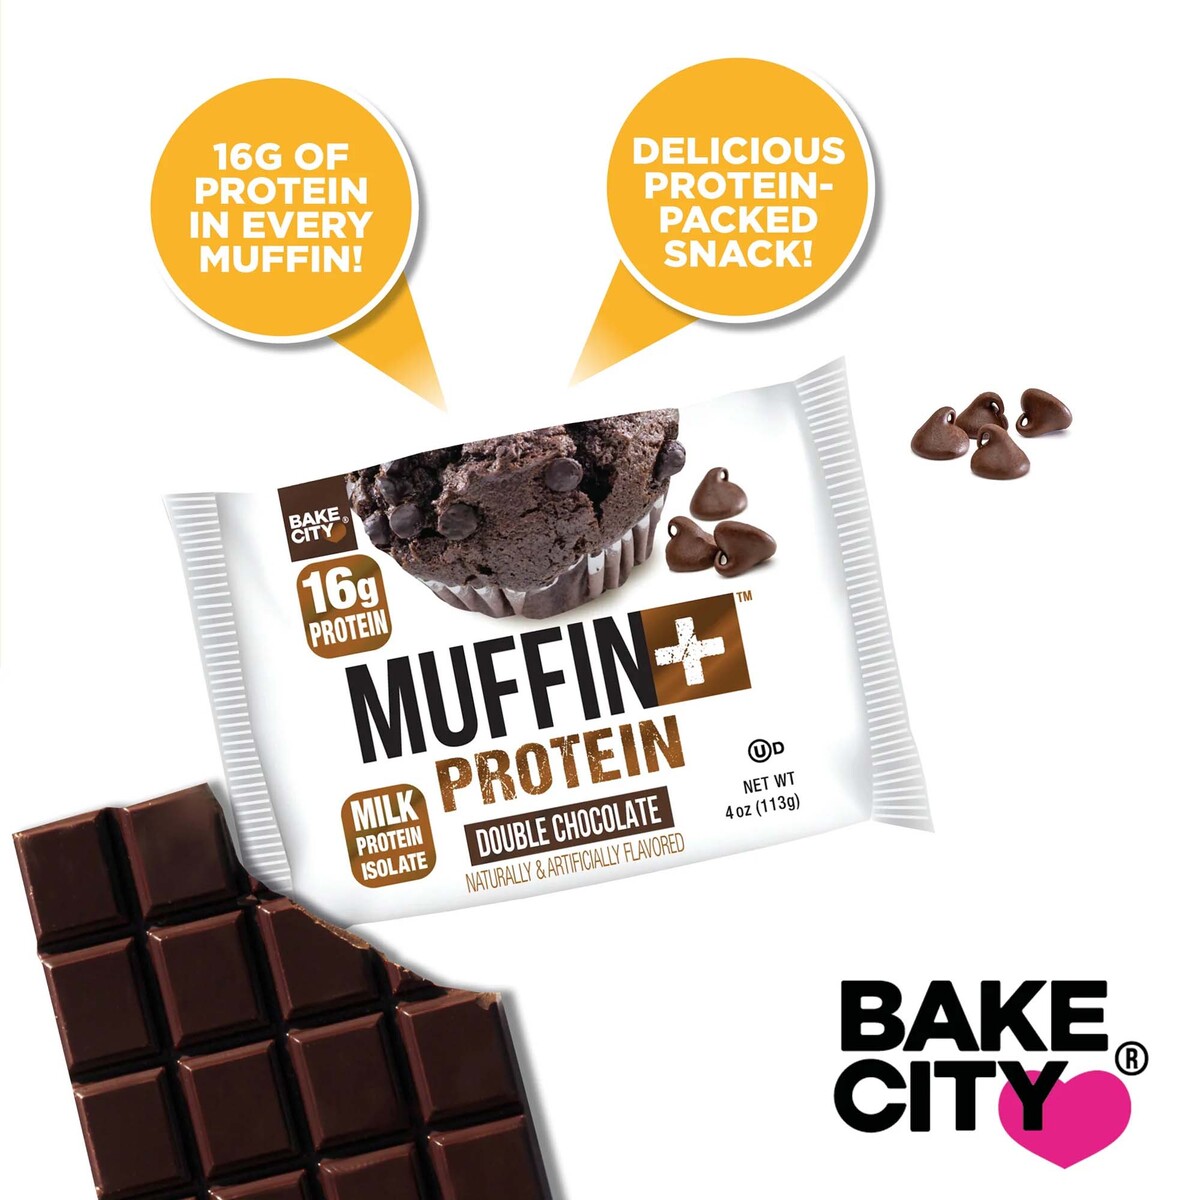 Bake City Double Chocolate Muffin+Protein, 113 g